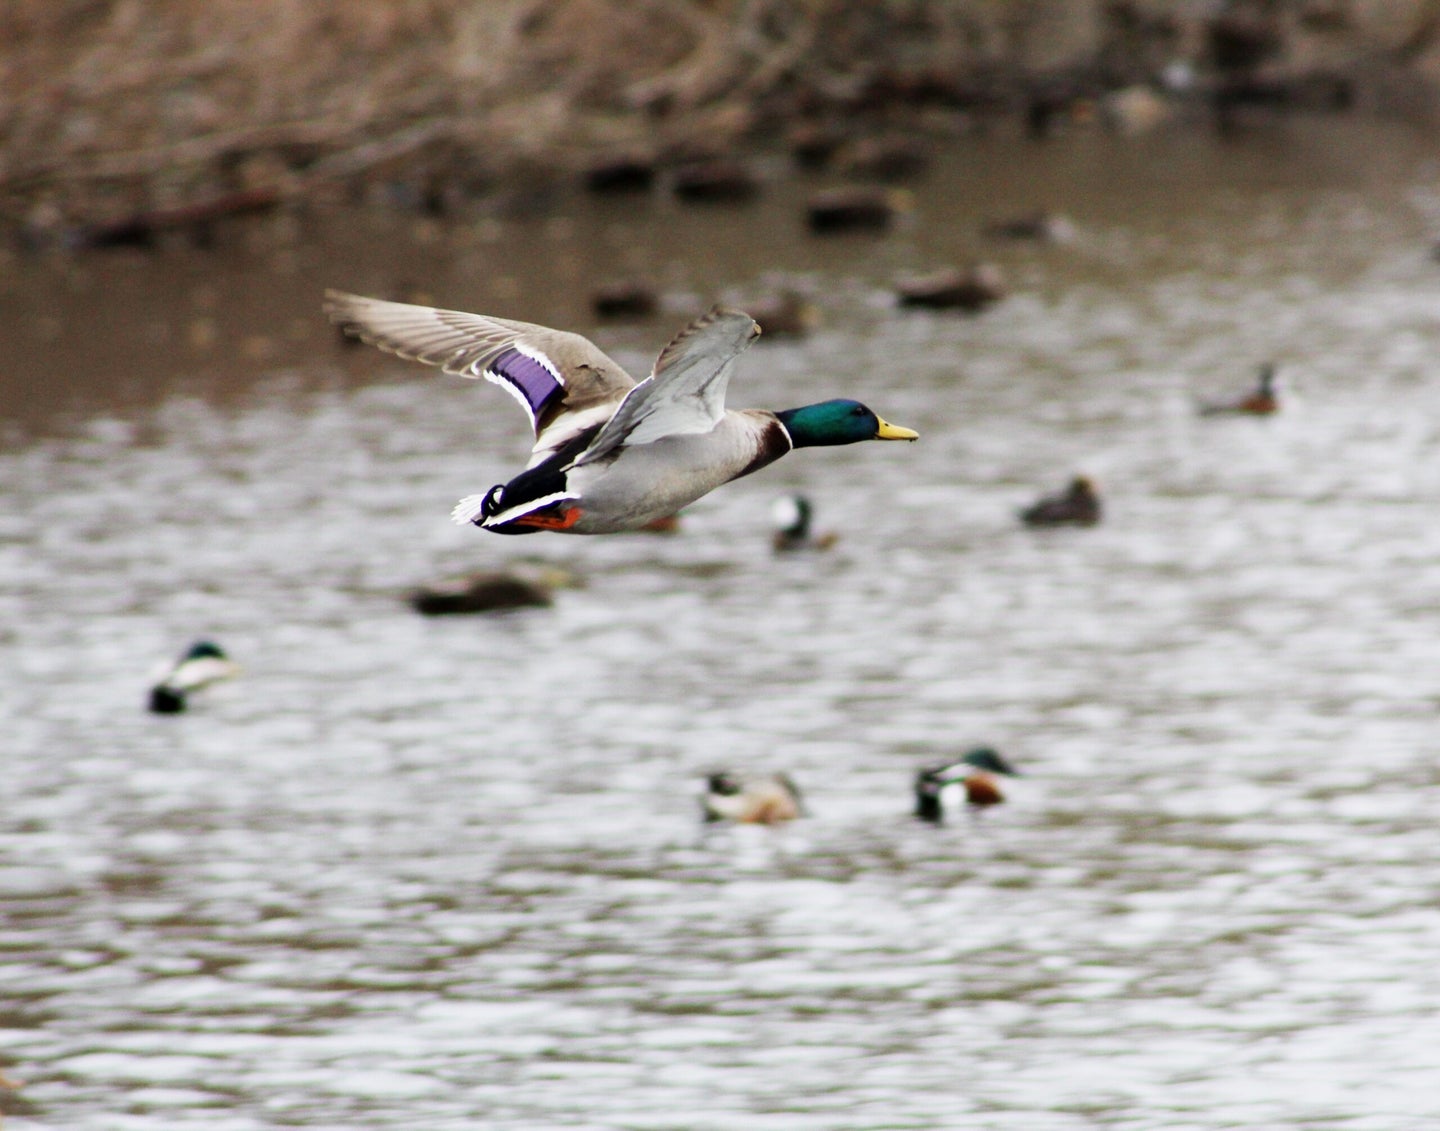 A drake mallard flying over the water.